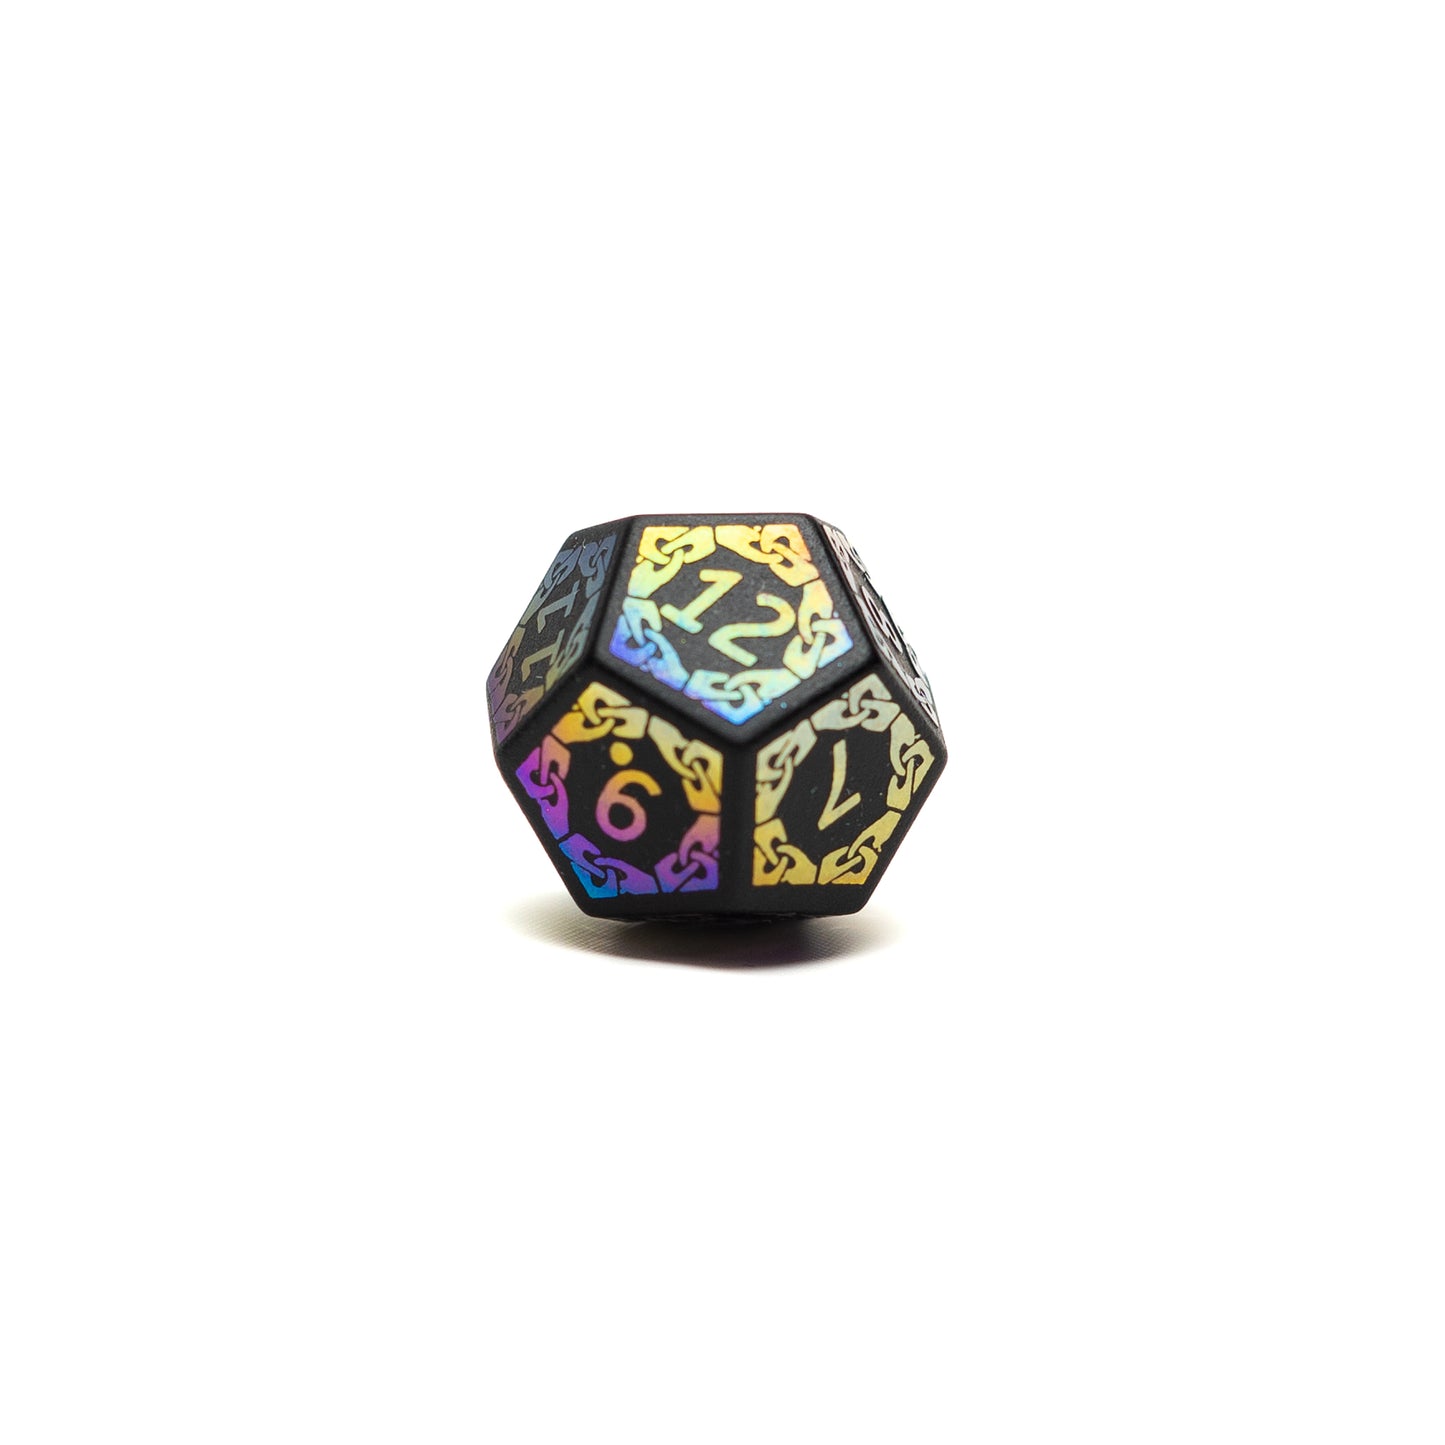 Roll Britannia Sharp Edged Obsidian Gemstone Dungeons and Dragons D12 Dice with Iridescent details